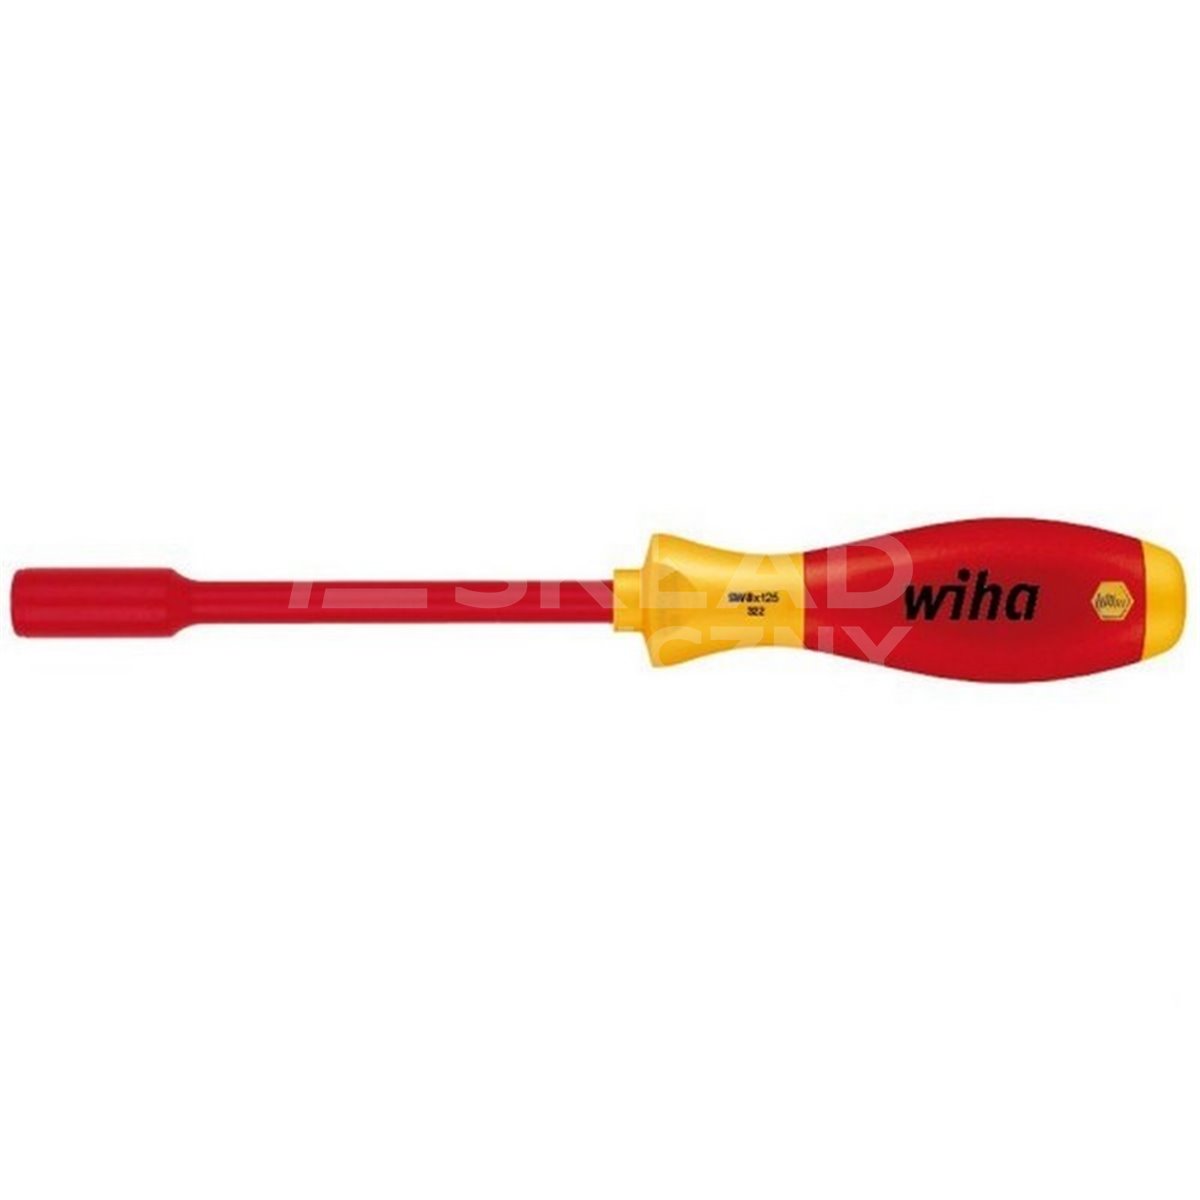 SoftFinish electric VDE 322 5 125mm socket wrench by Wiha 00855.